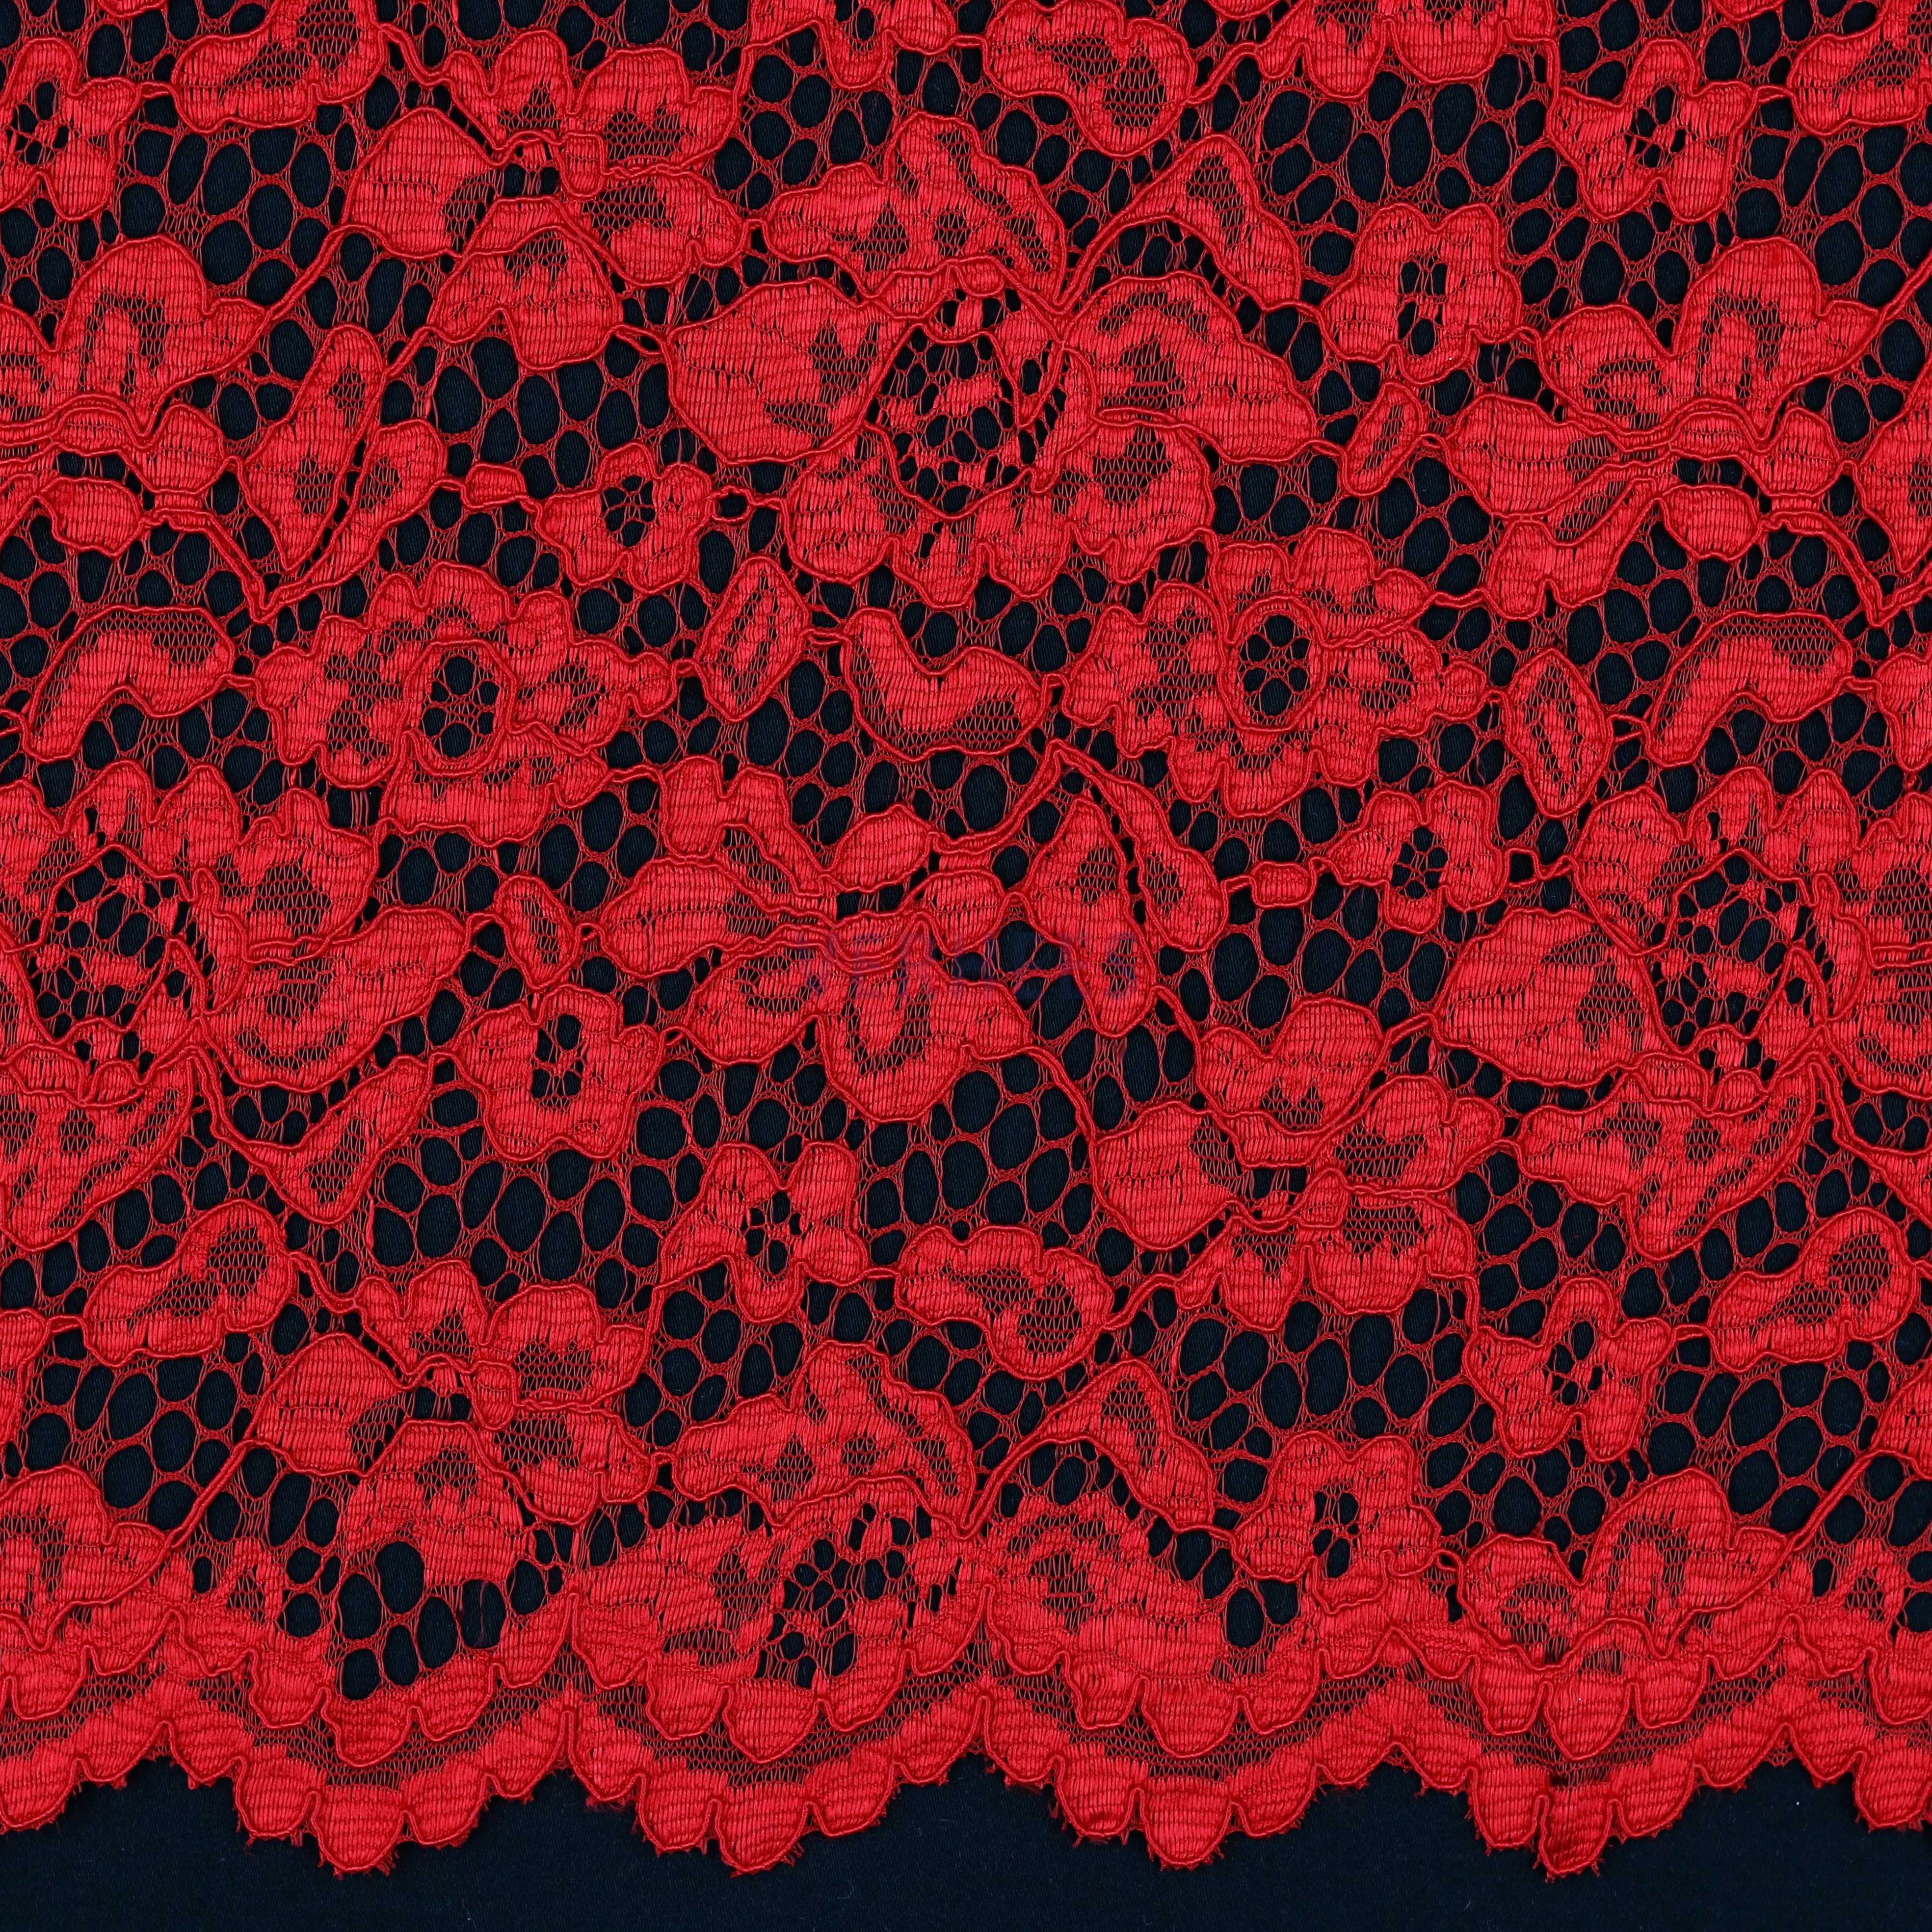 LACE BORDER 2 SIDES RED (high resolution)